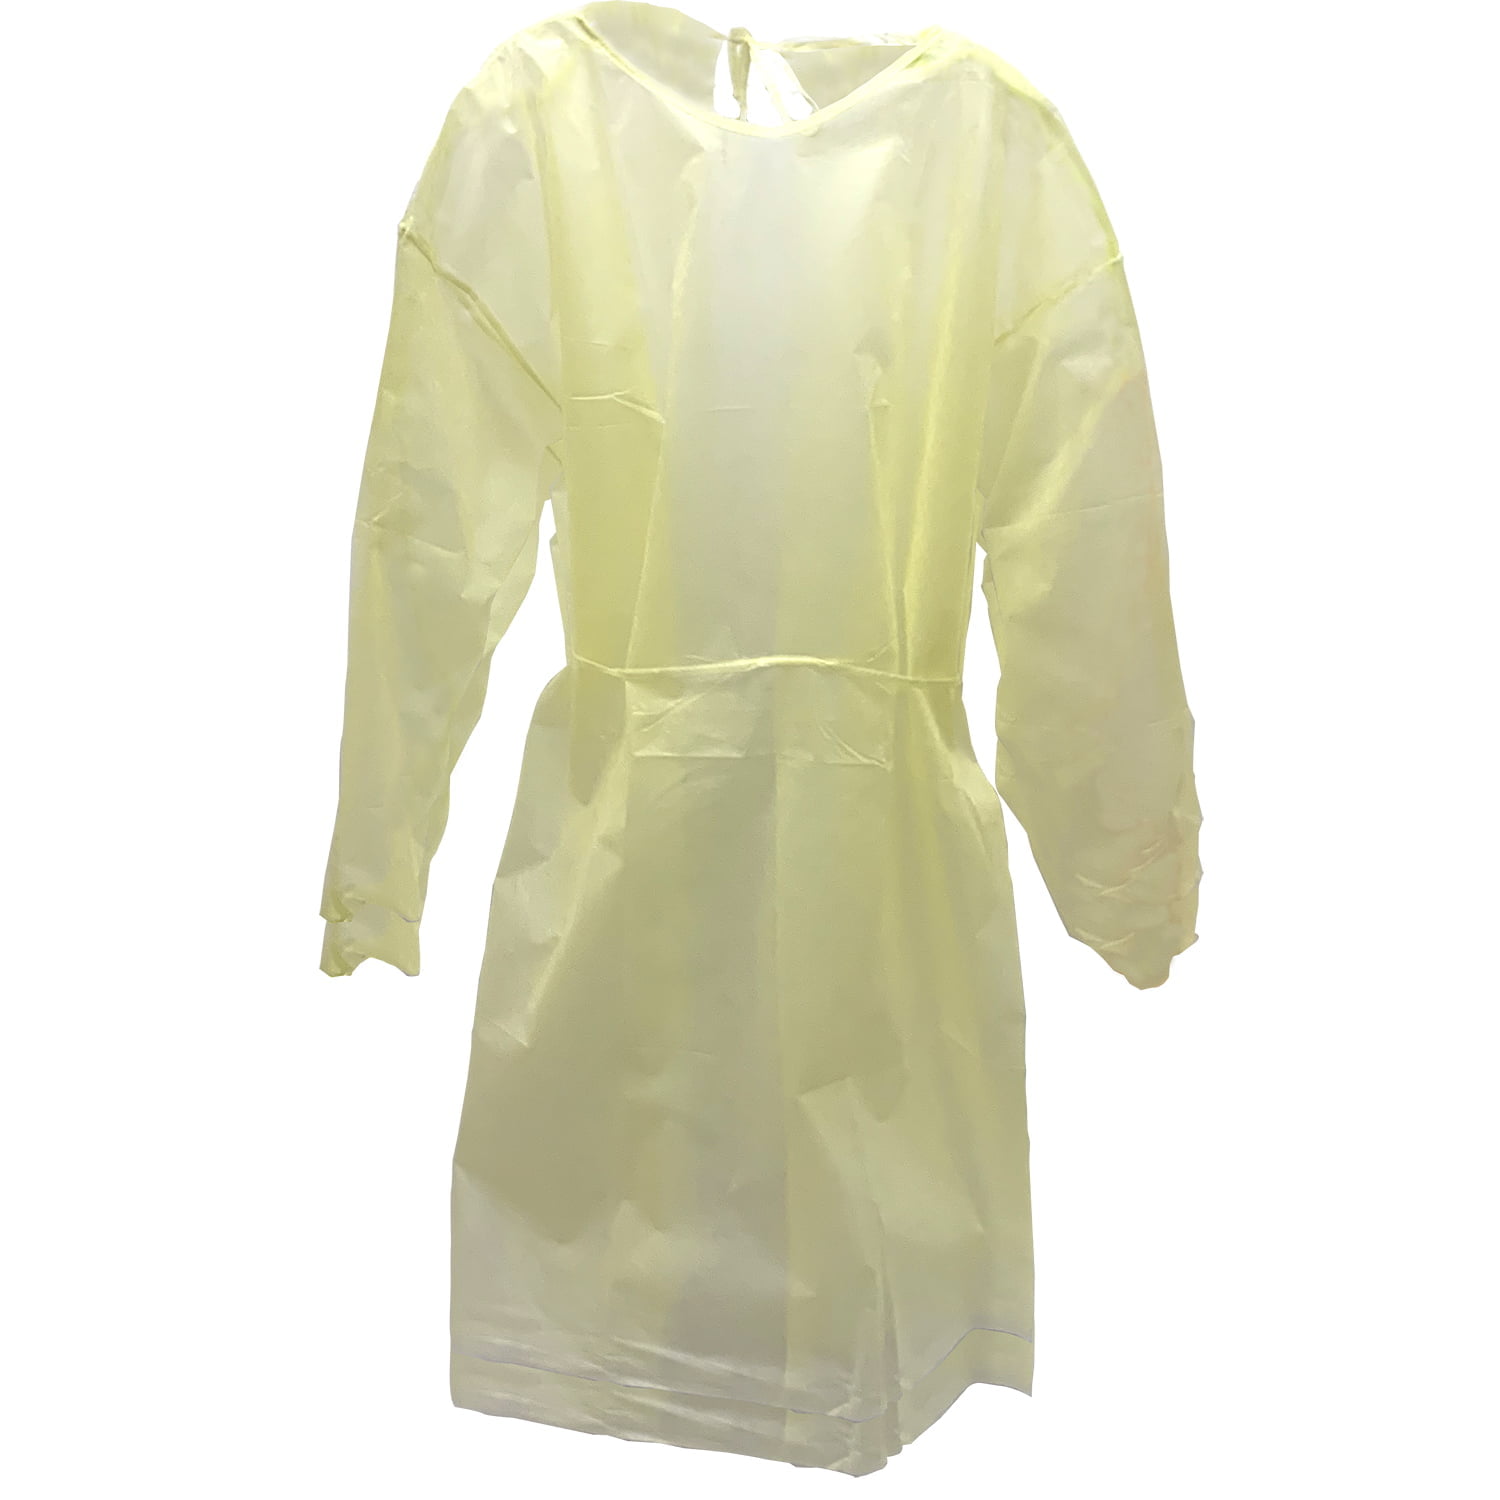 Polypropylene, Isolation Gown: #PPGOWN100 (SOLD BY THE CASE)